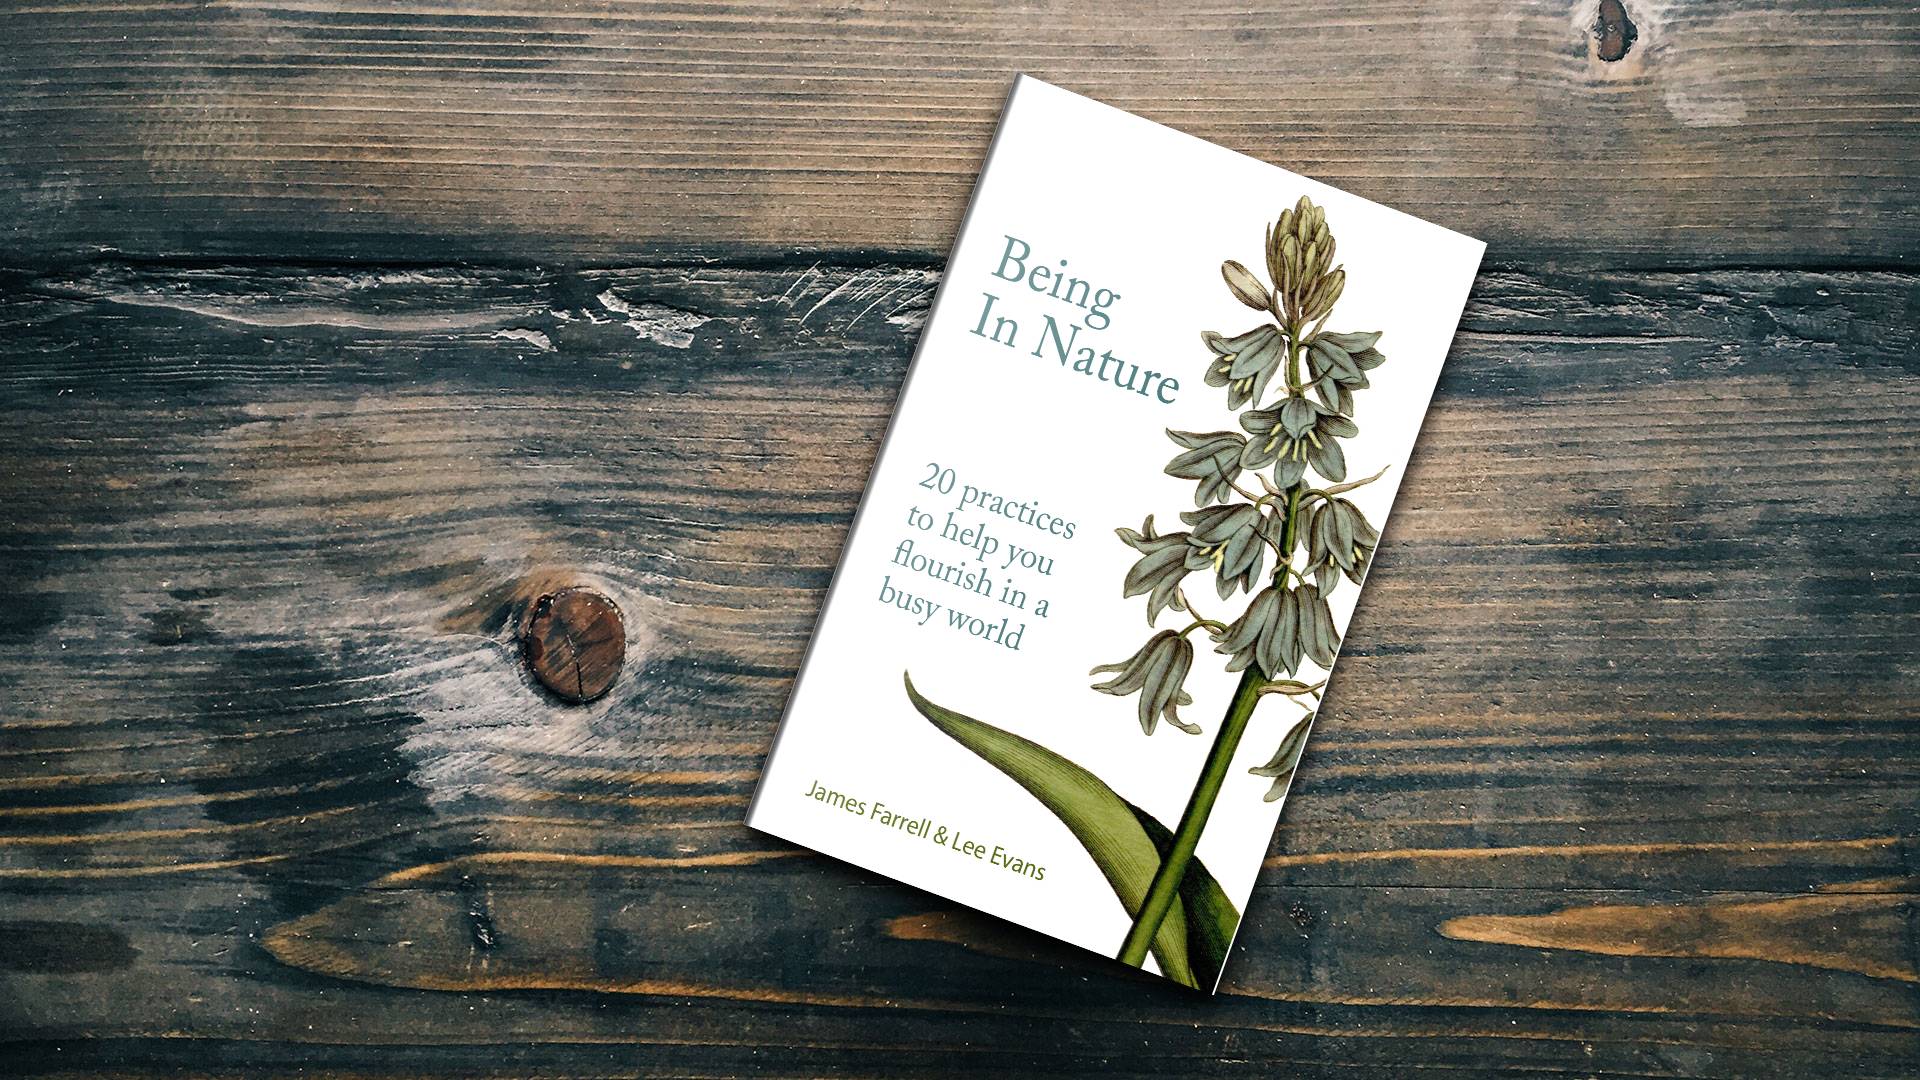 Being in Nature book on wooden table